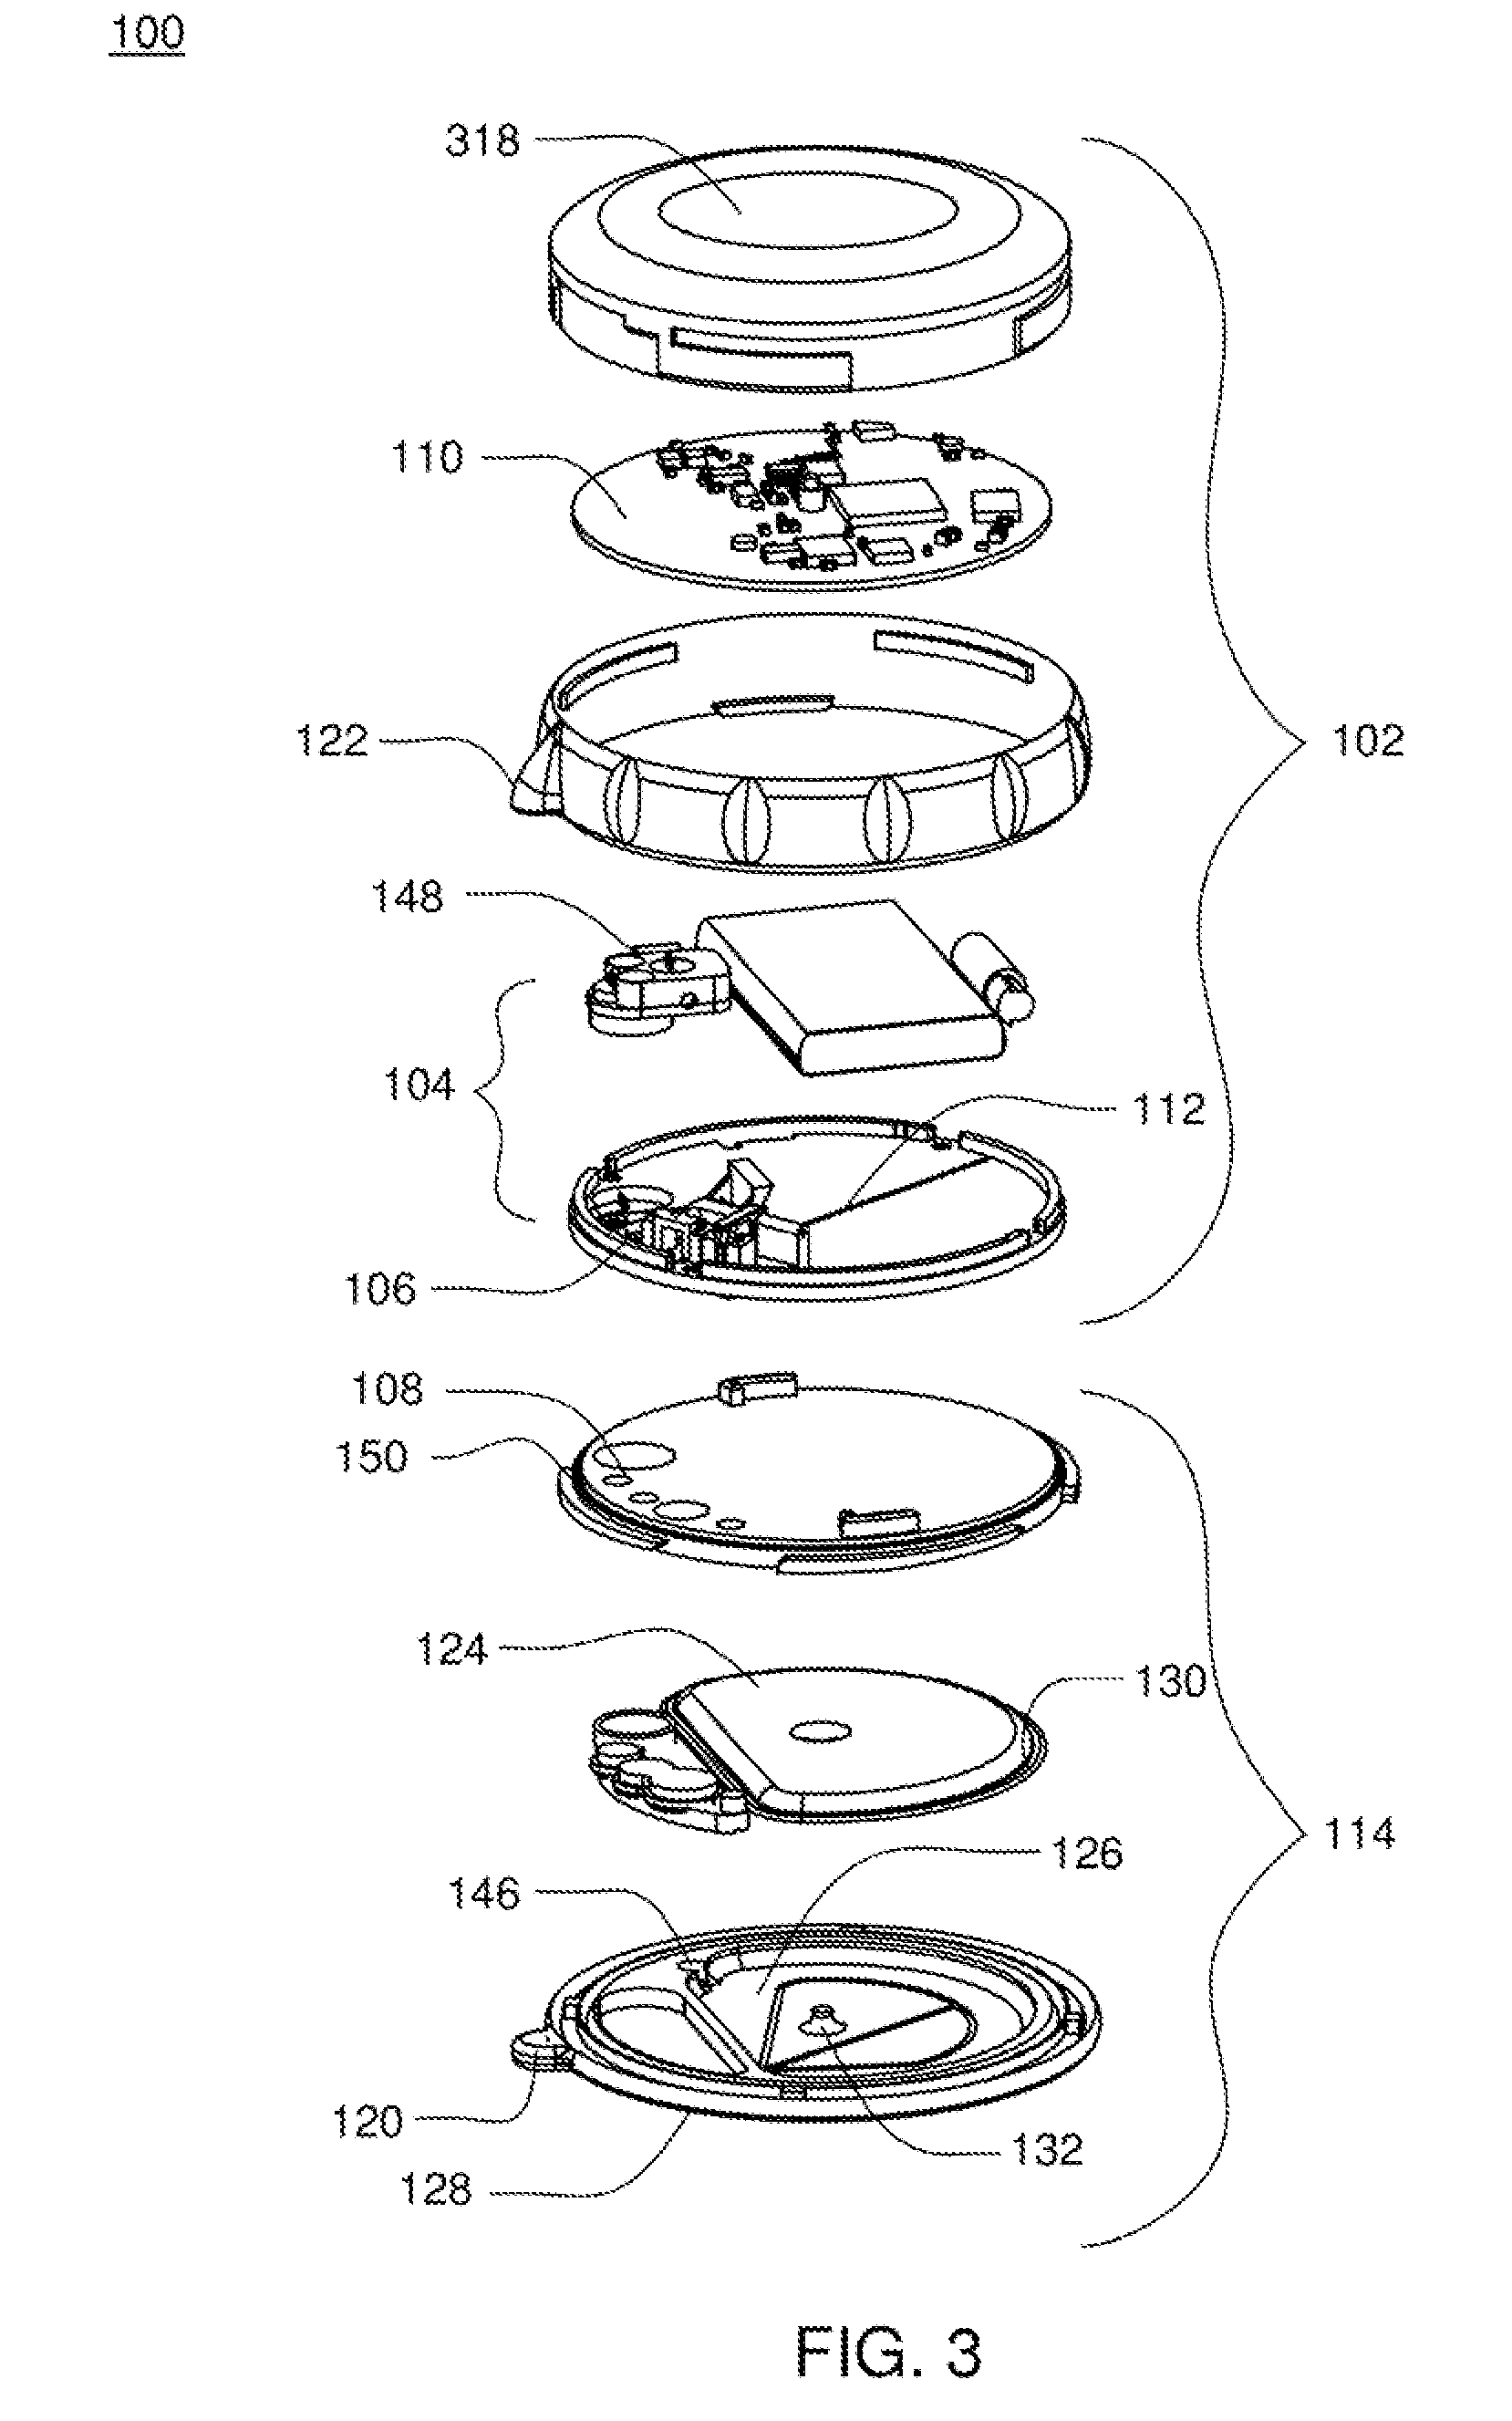 Apparatus, Systems and Methods for An Infusion Pump Assembly